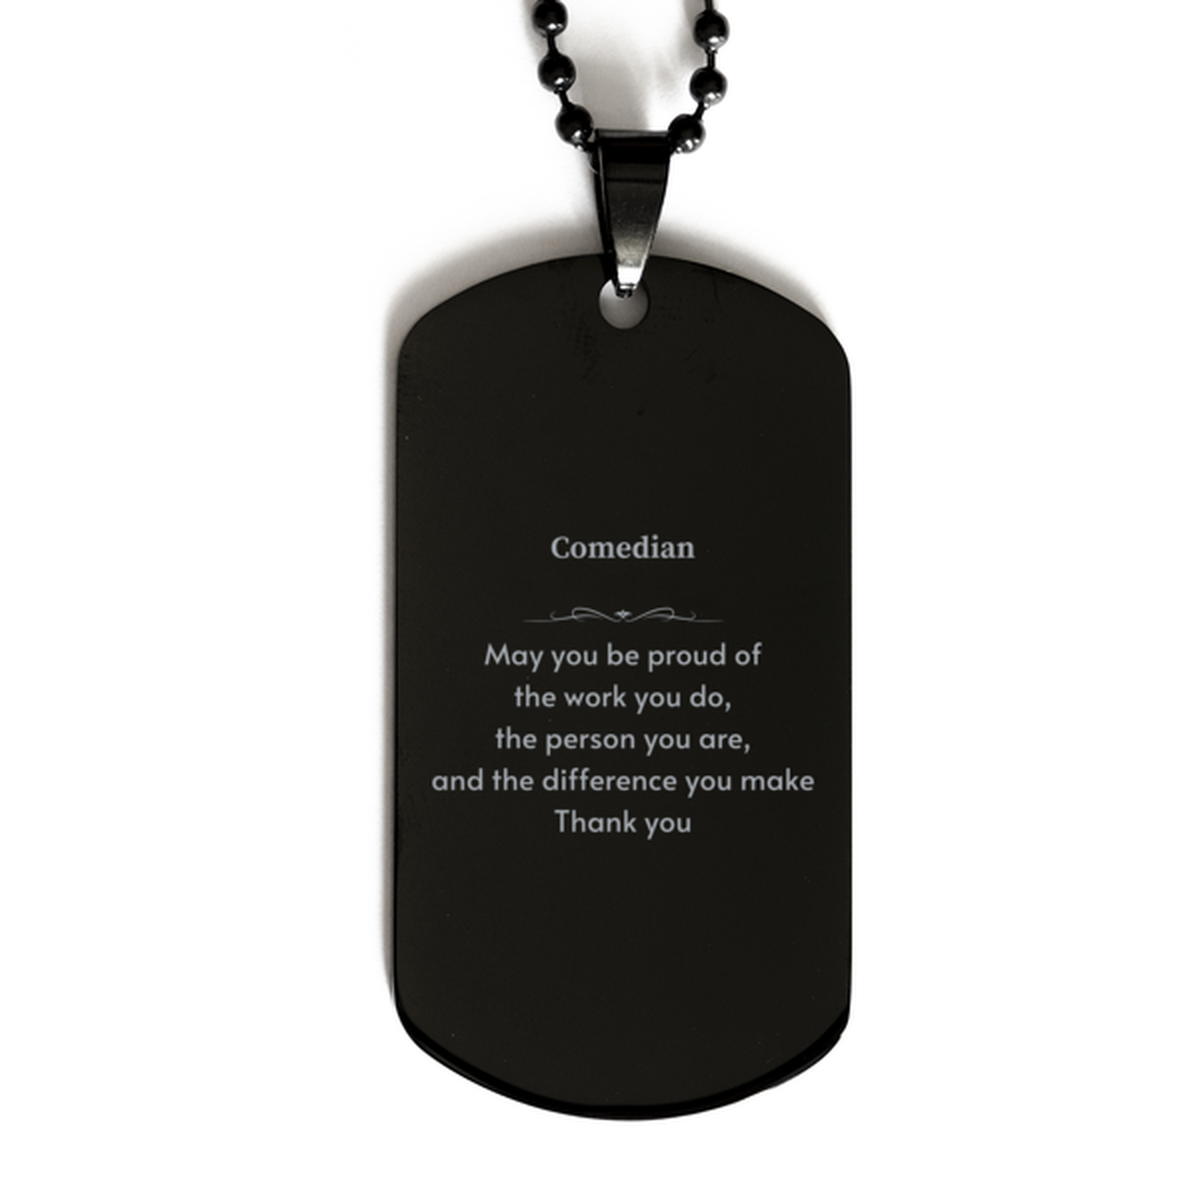 Heartwarming Black Dog Tag Retirement Coworkers Gifts for Comedian, Comedian May You be proud of the work you do, the person you are Gifts for Boss Men Women Friends